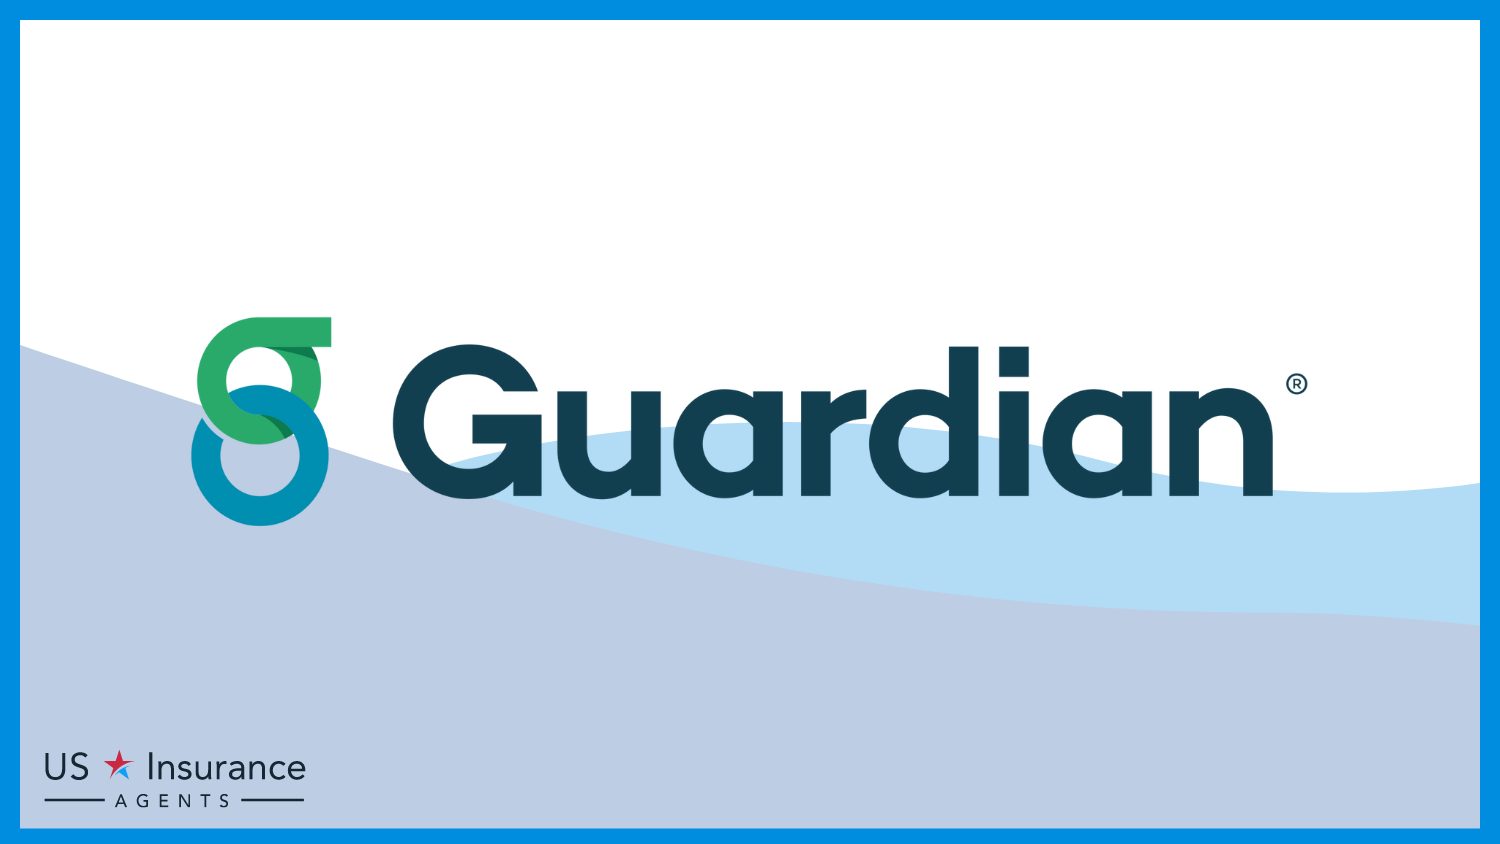 Guardian Life: Best Life Insurance for Overweight People